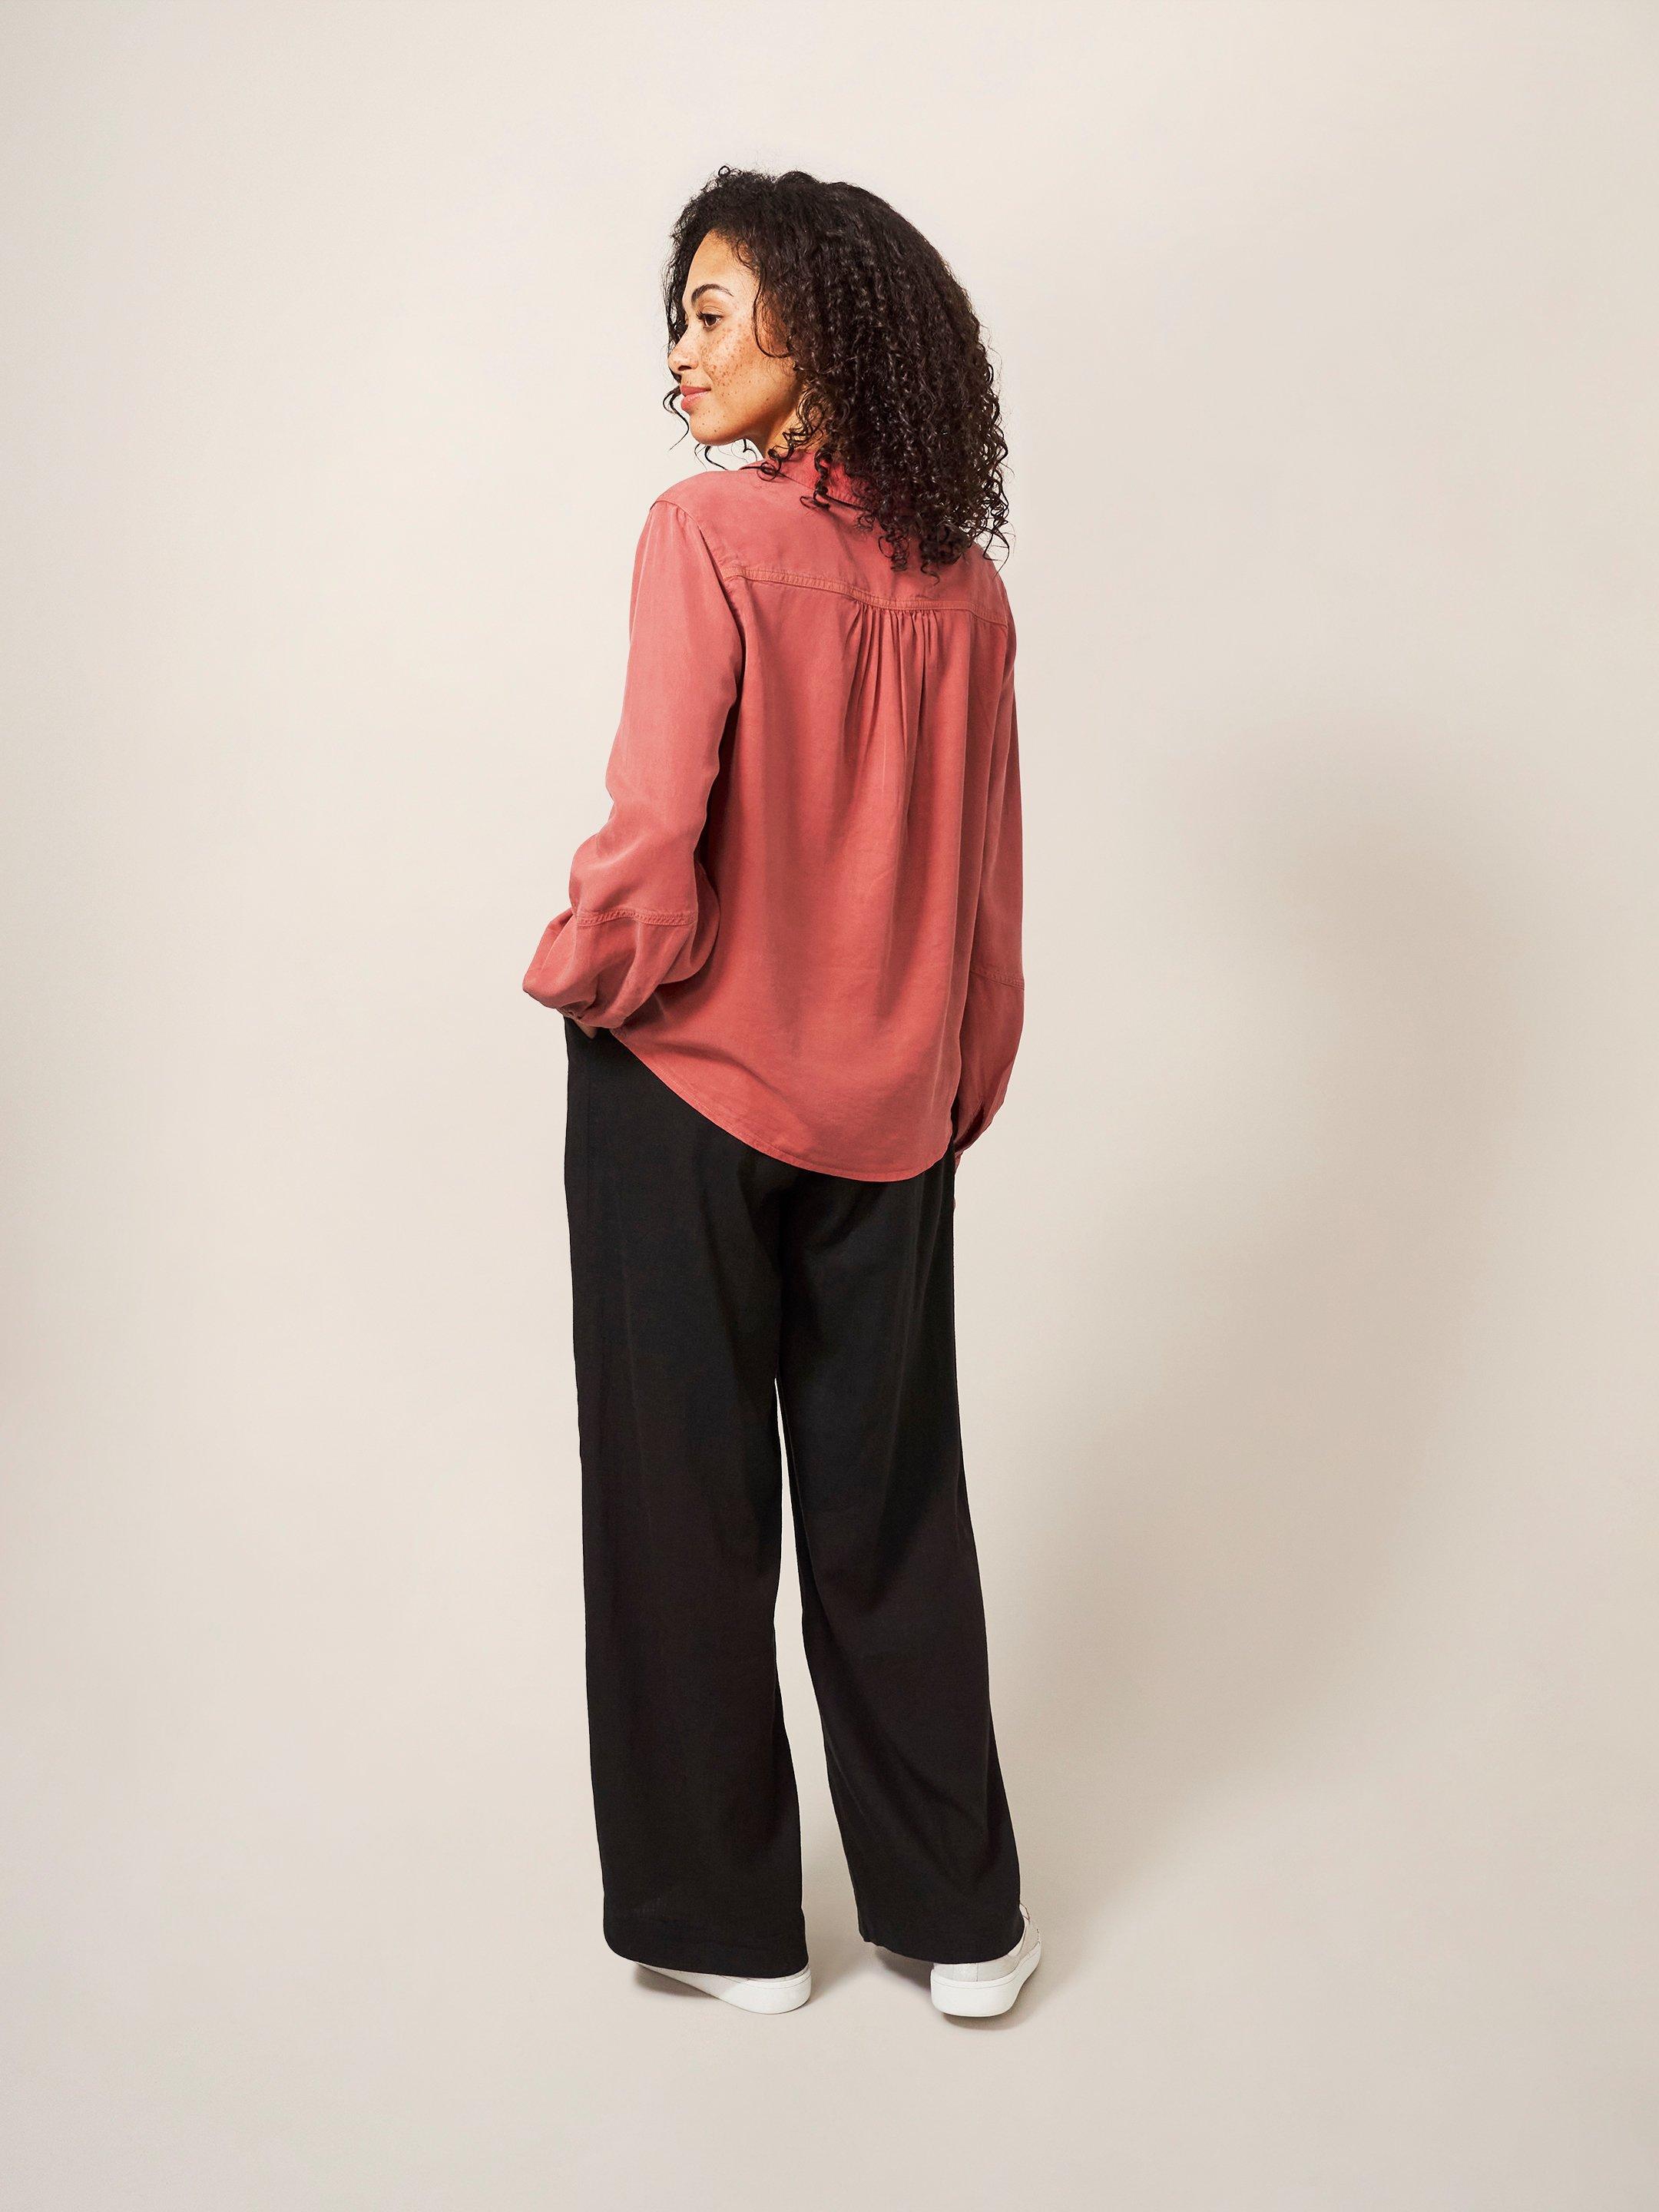 Lucie Shirt in DUS PINK - MODEL BACK